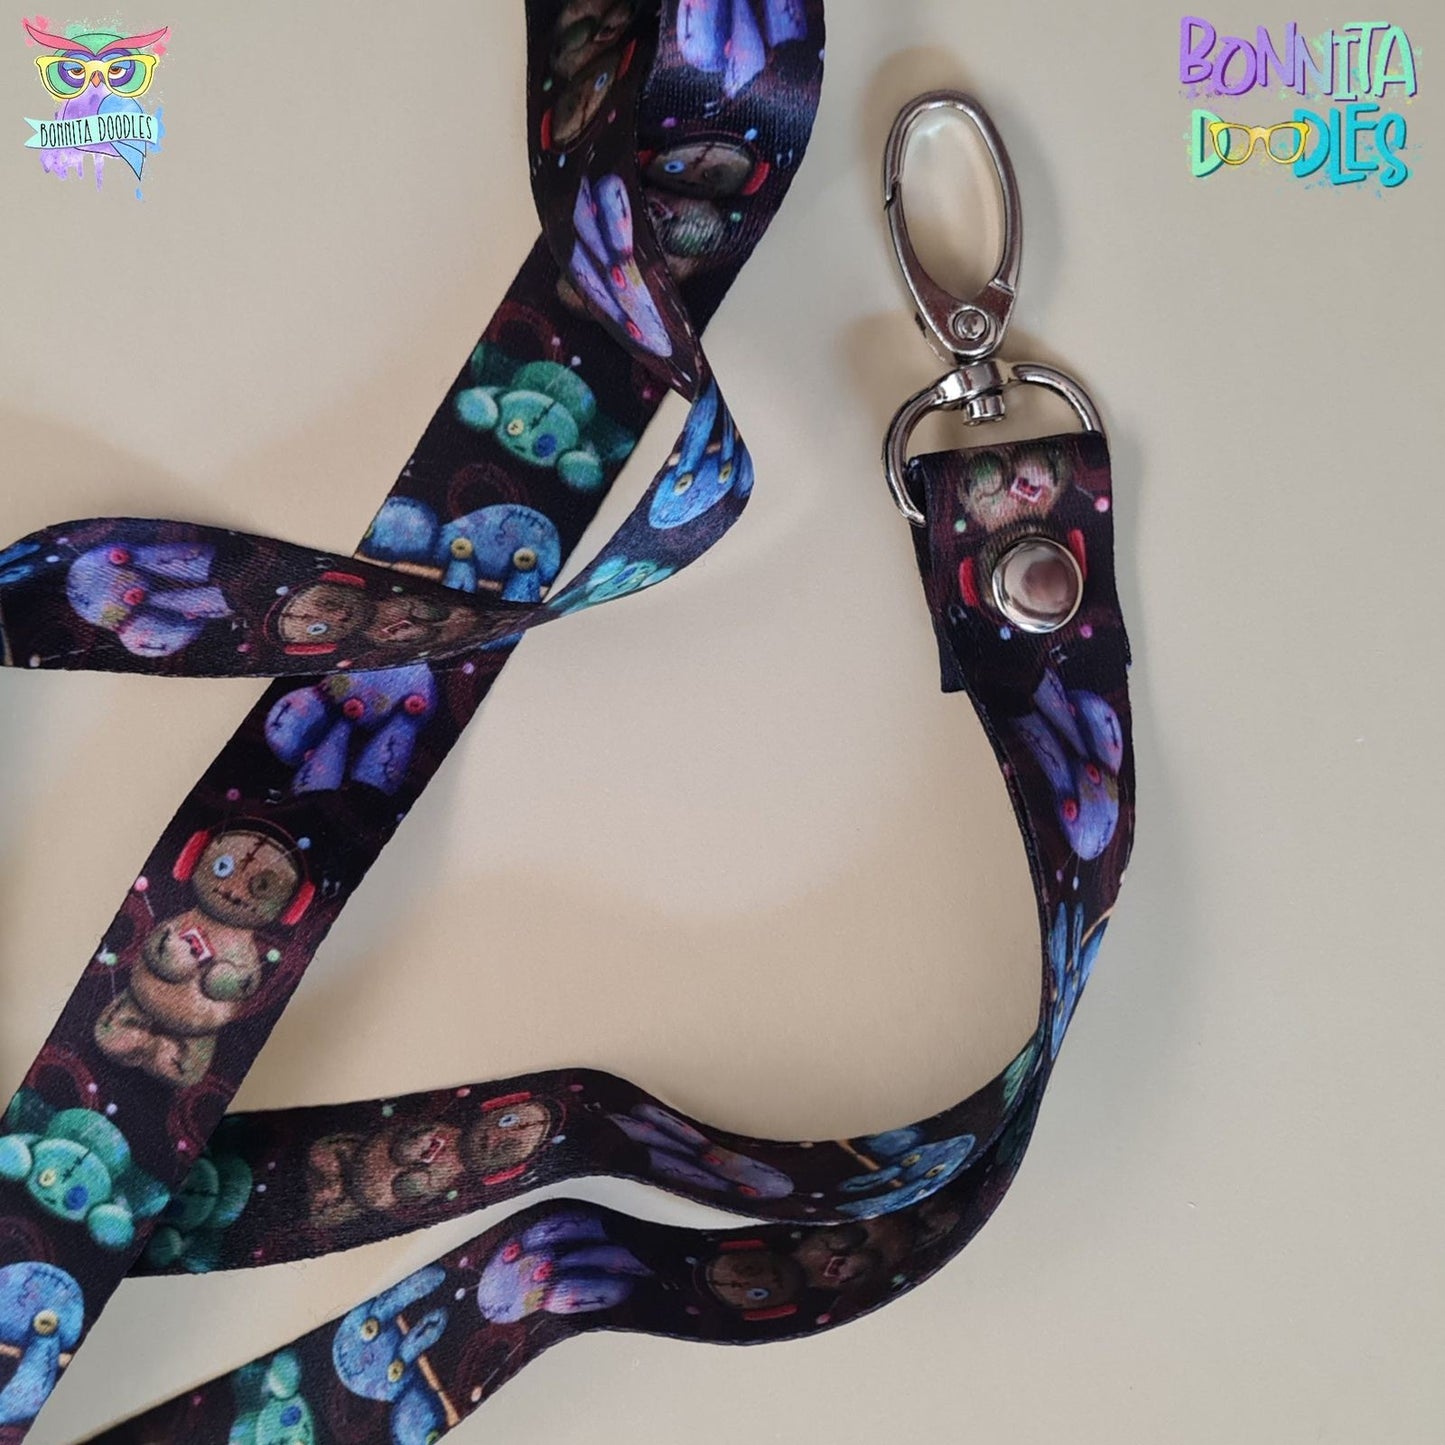 Voodoo dolls - Lanyard - soft and perfect for sensory accommodation.